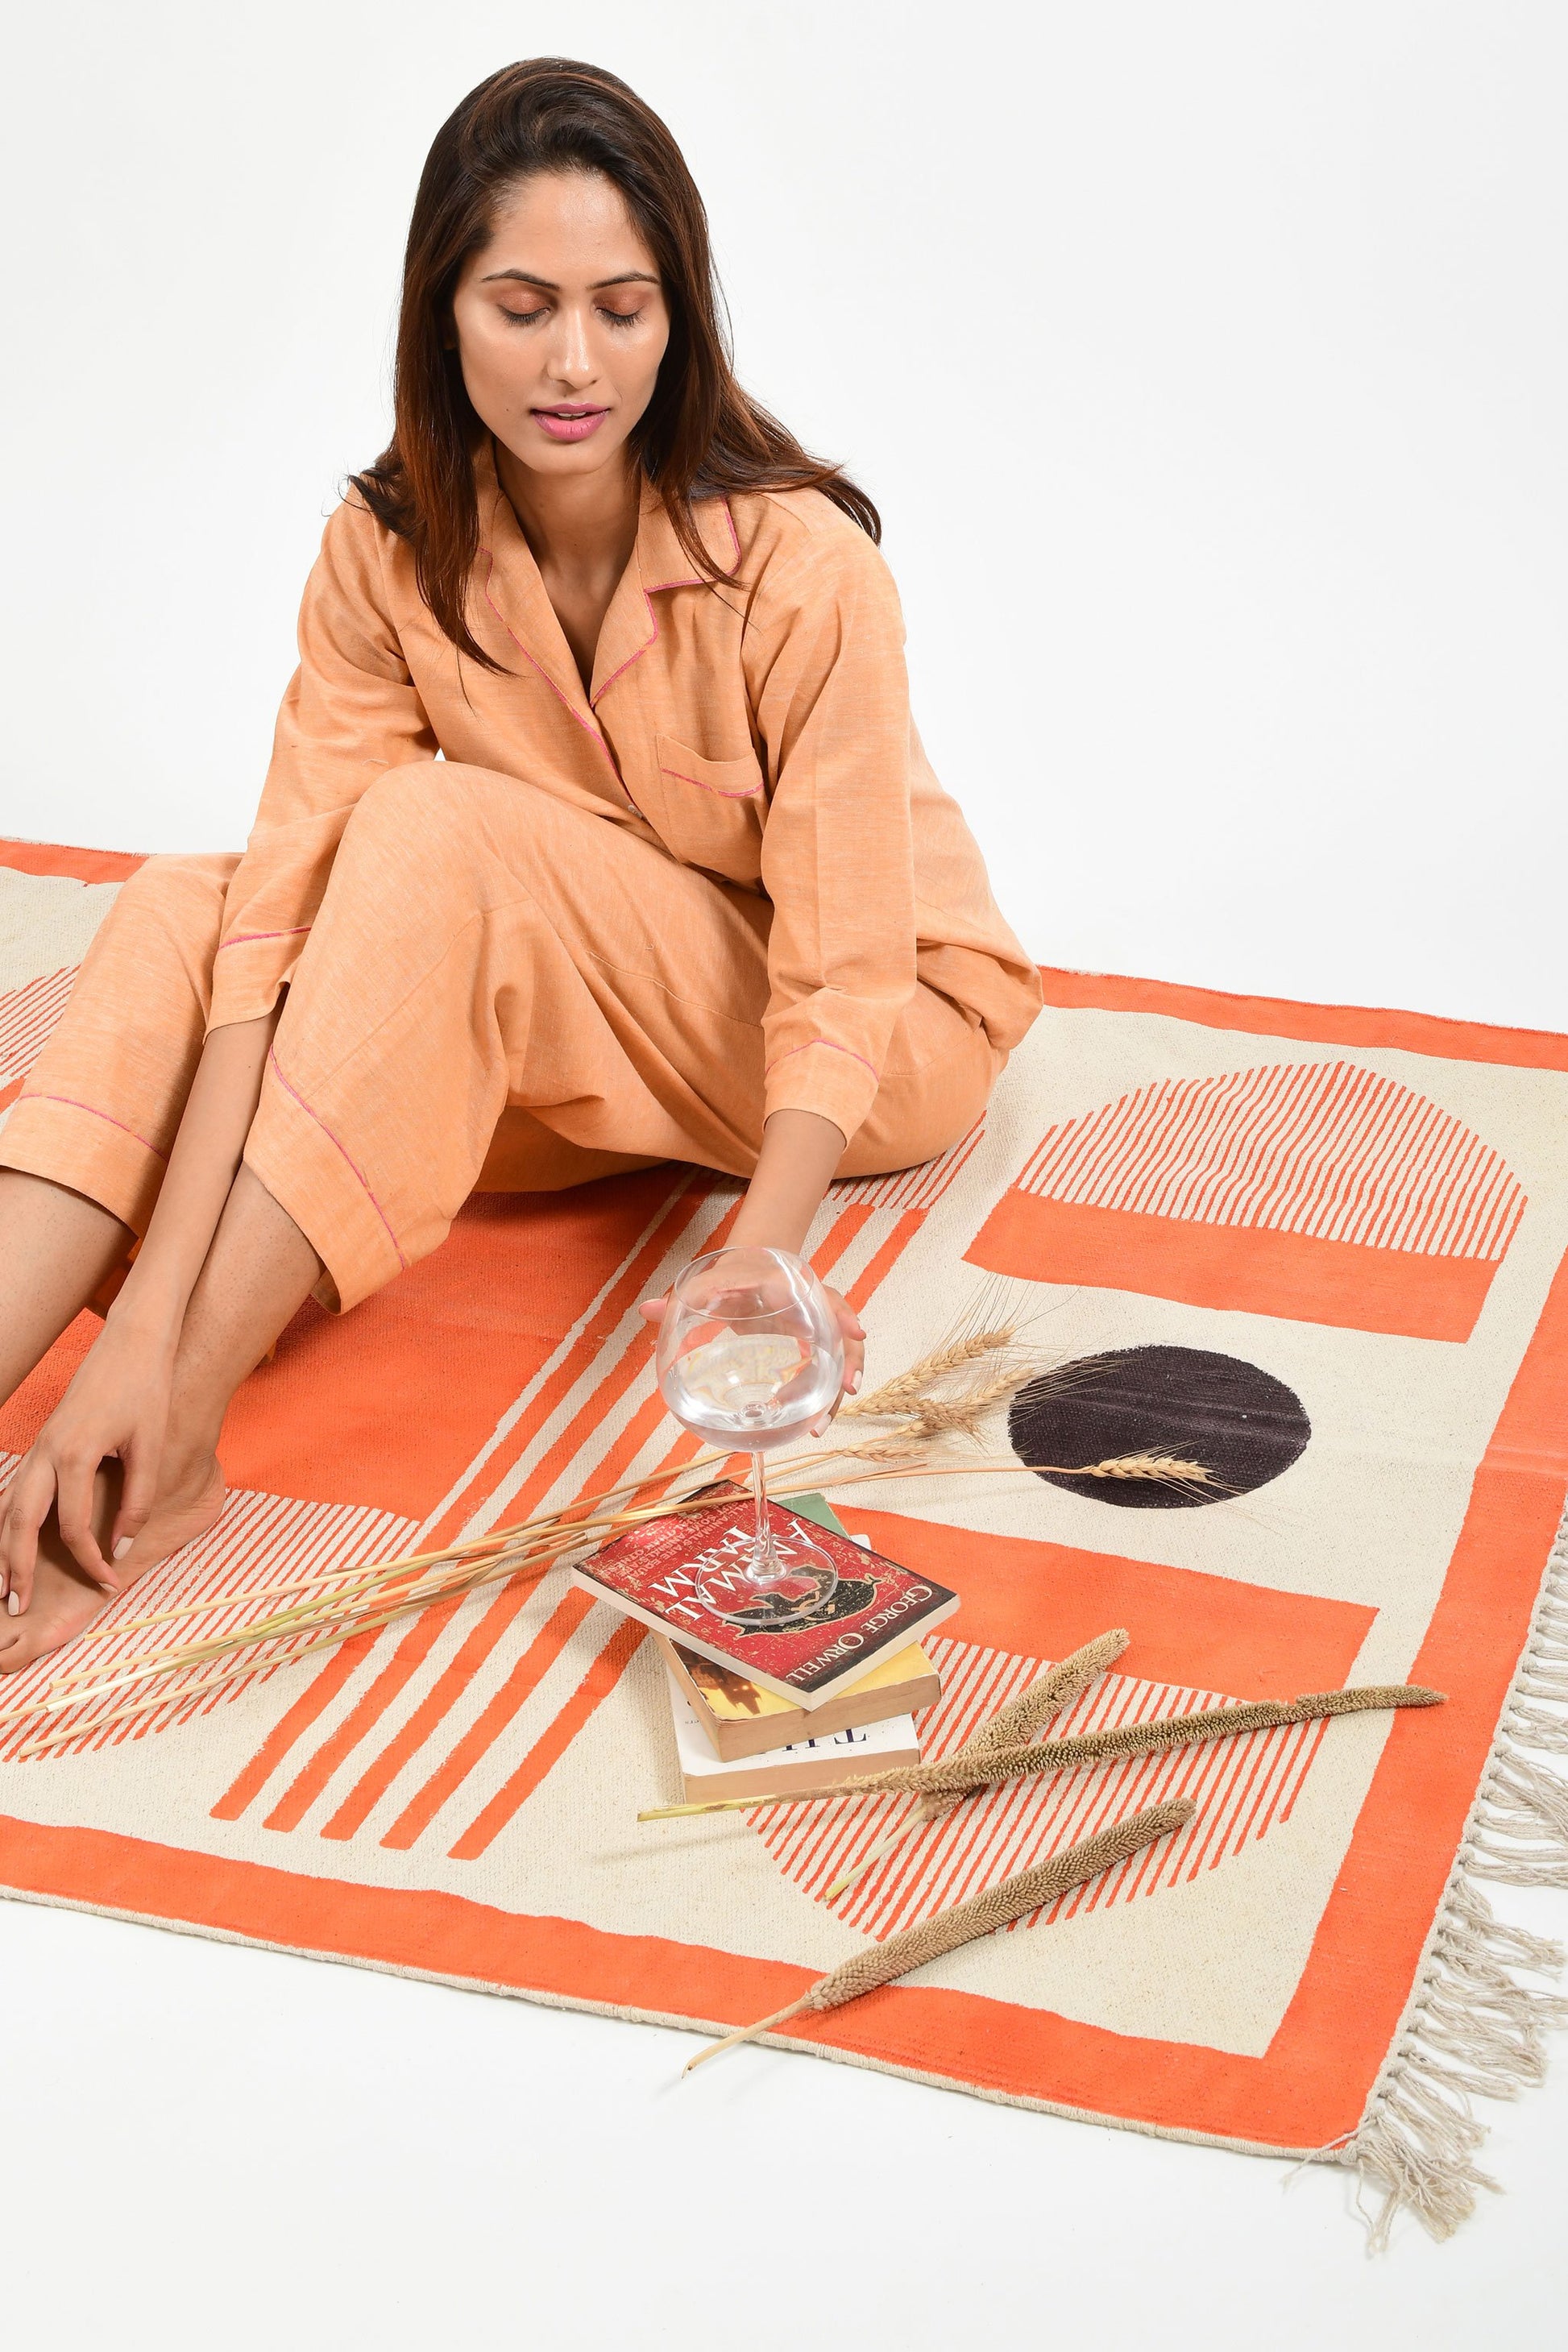 Creative pose of an Indian female womenswear fashion model in azo-free dyed handspun and handwoven khadi cotton nightwear pyjama & shirt in orange chambray by Cotton Rack and sitting on a handmade carpet with books and wine glass filled with water.